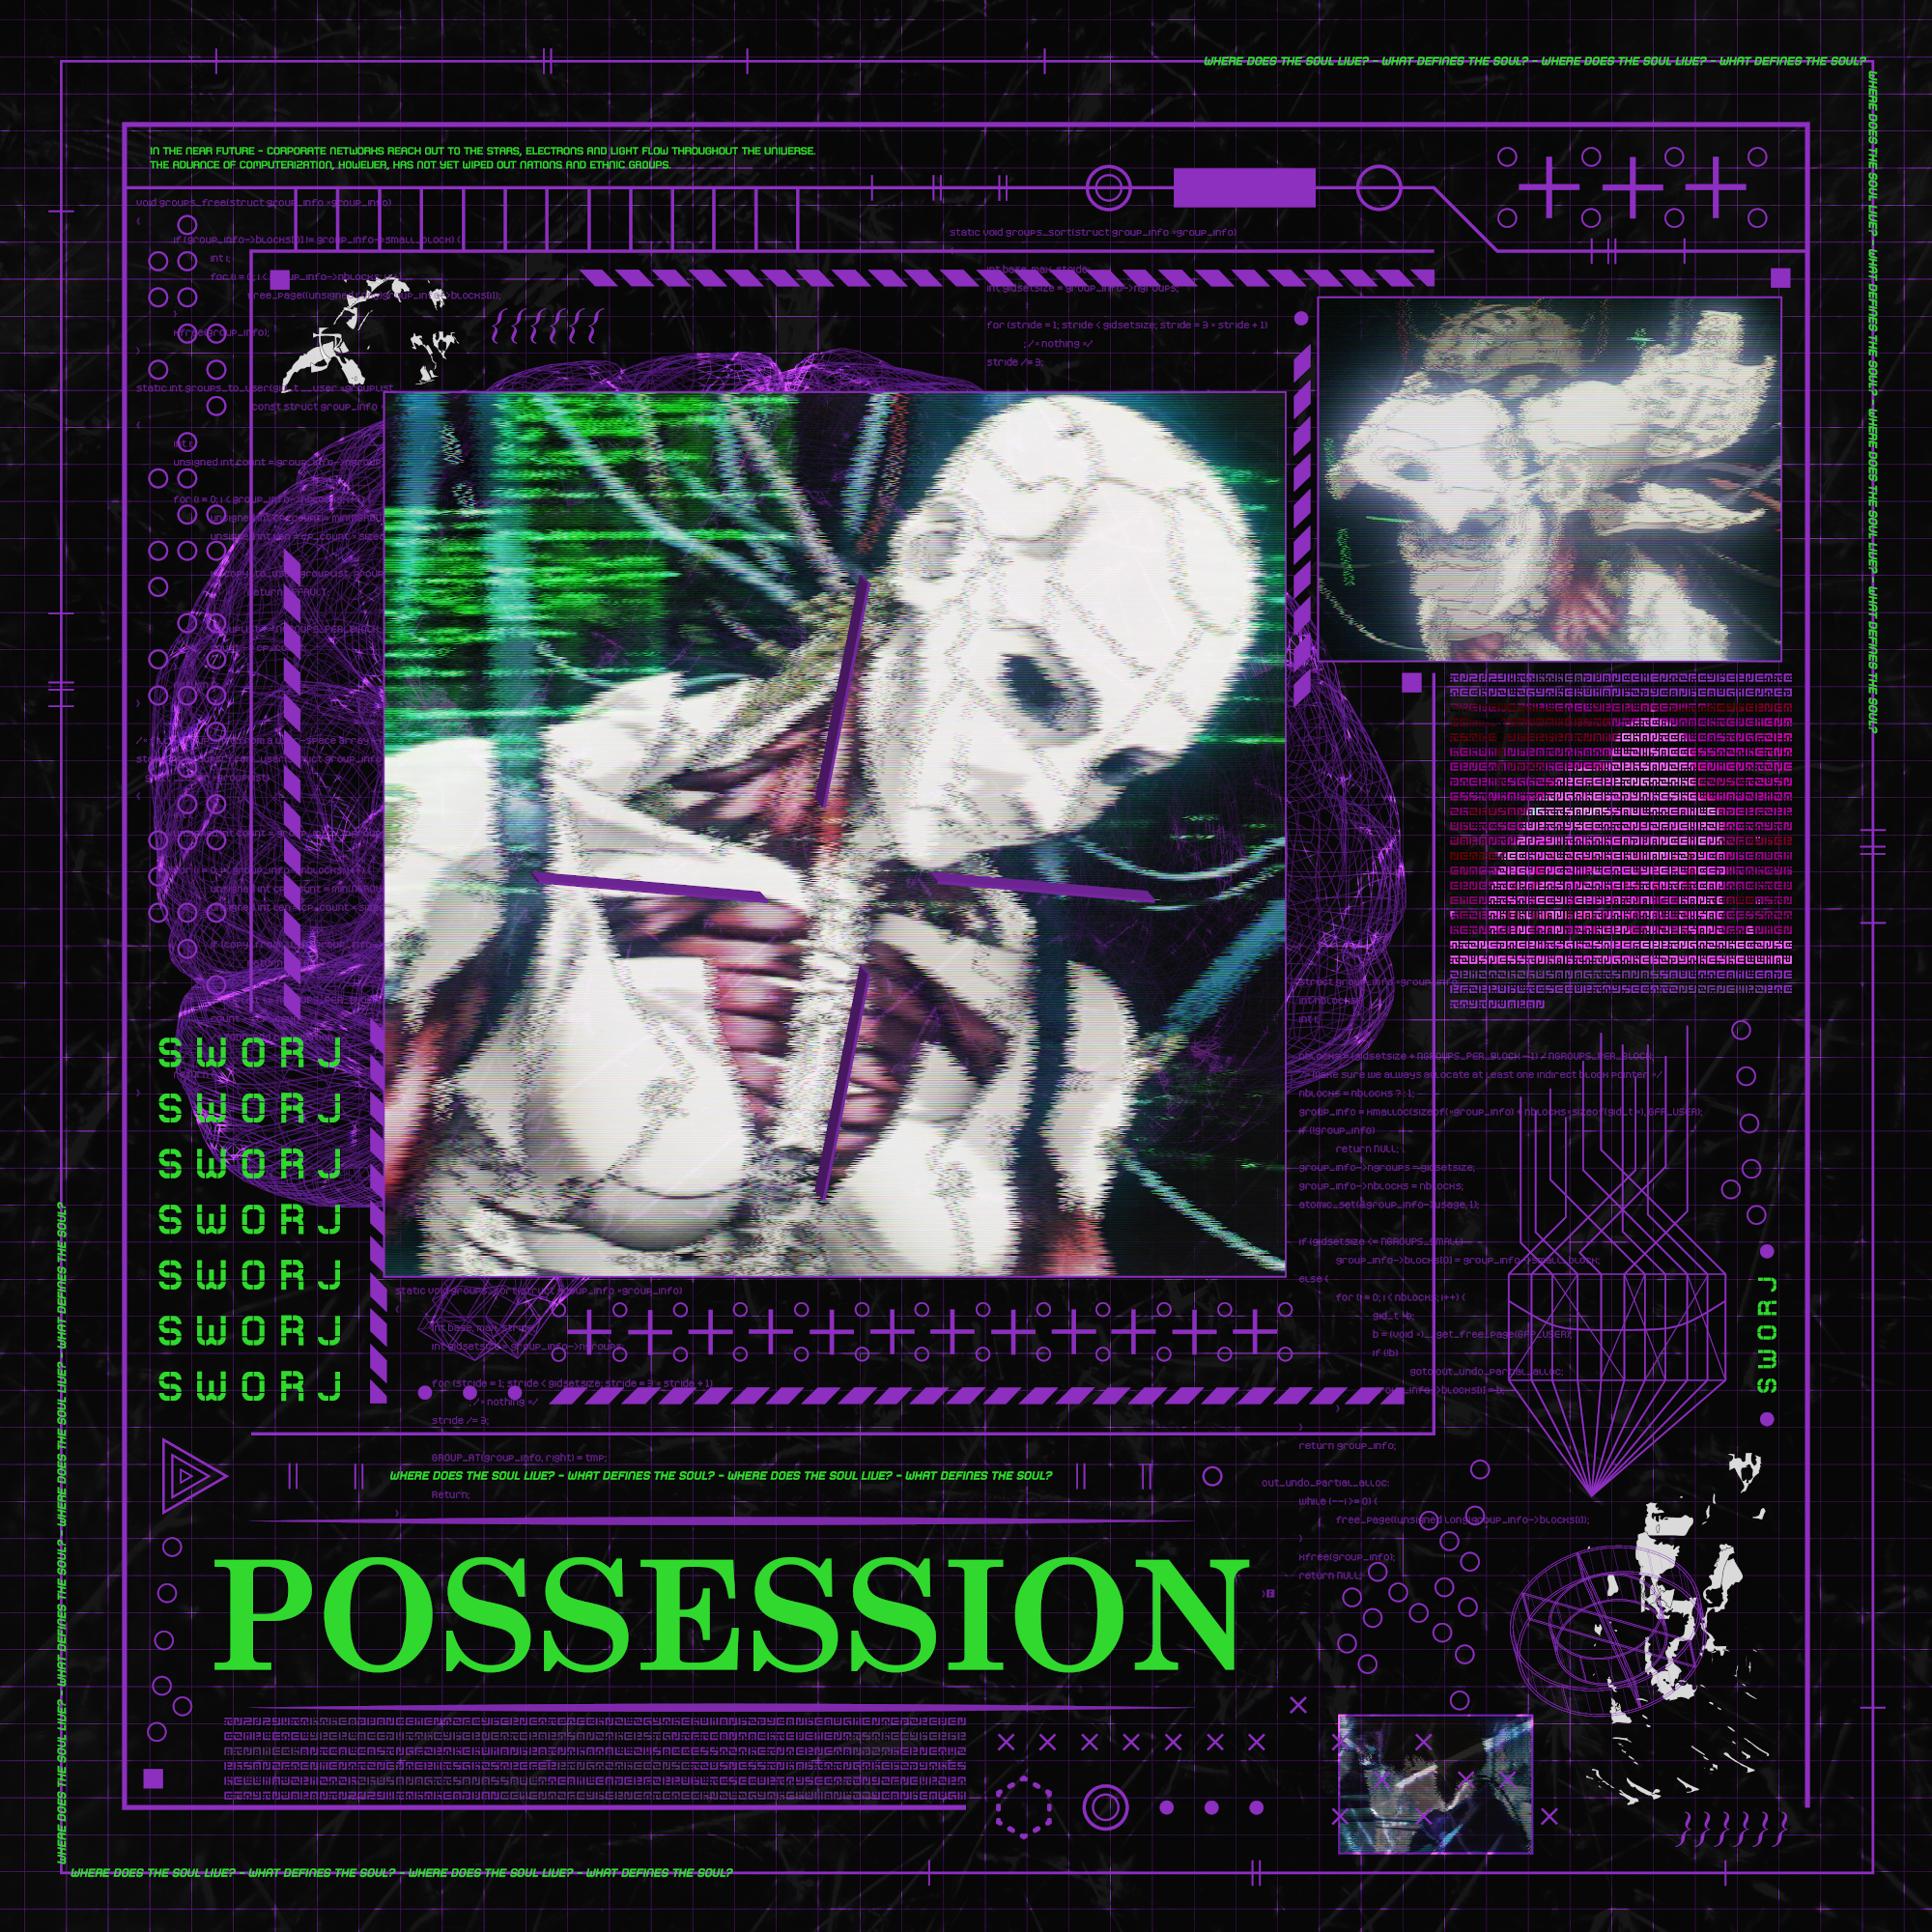 Cover art for the single Possession.